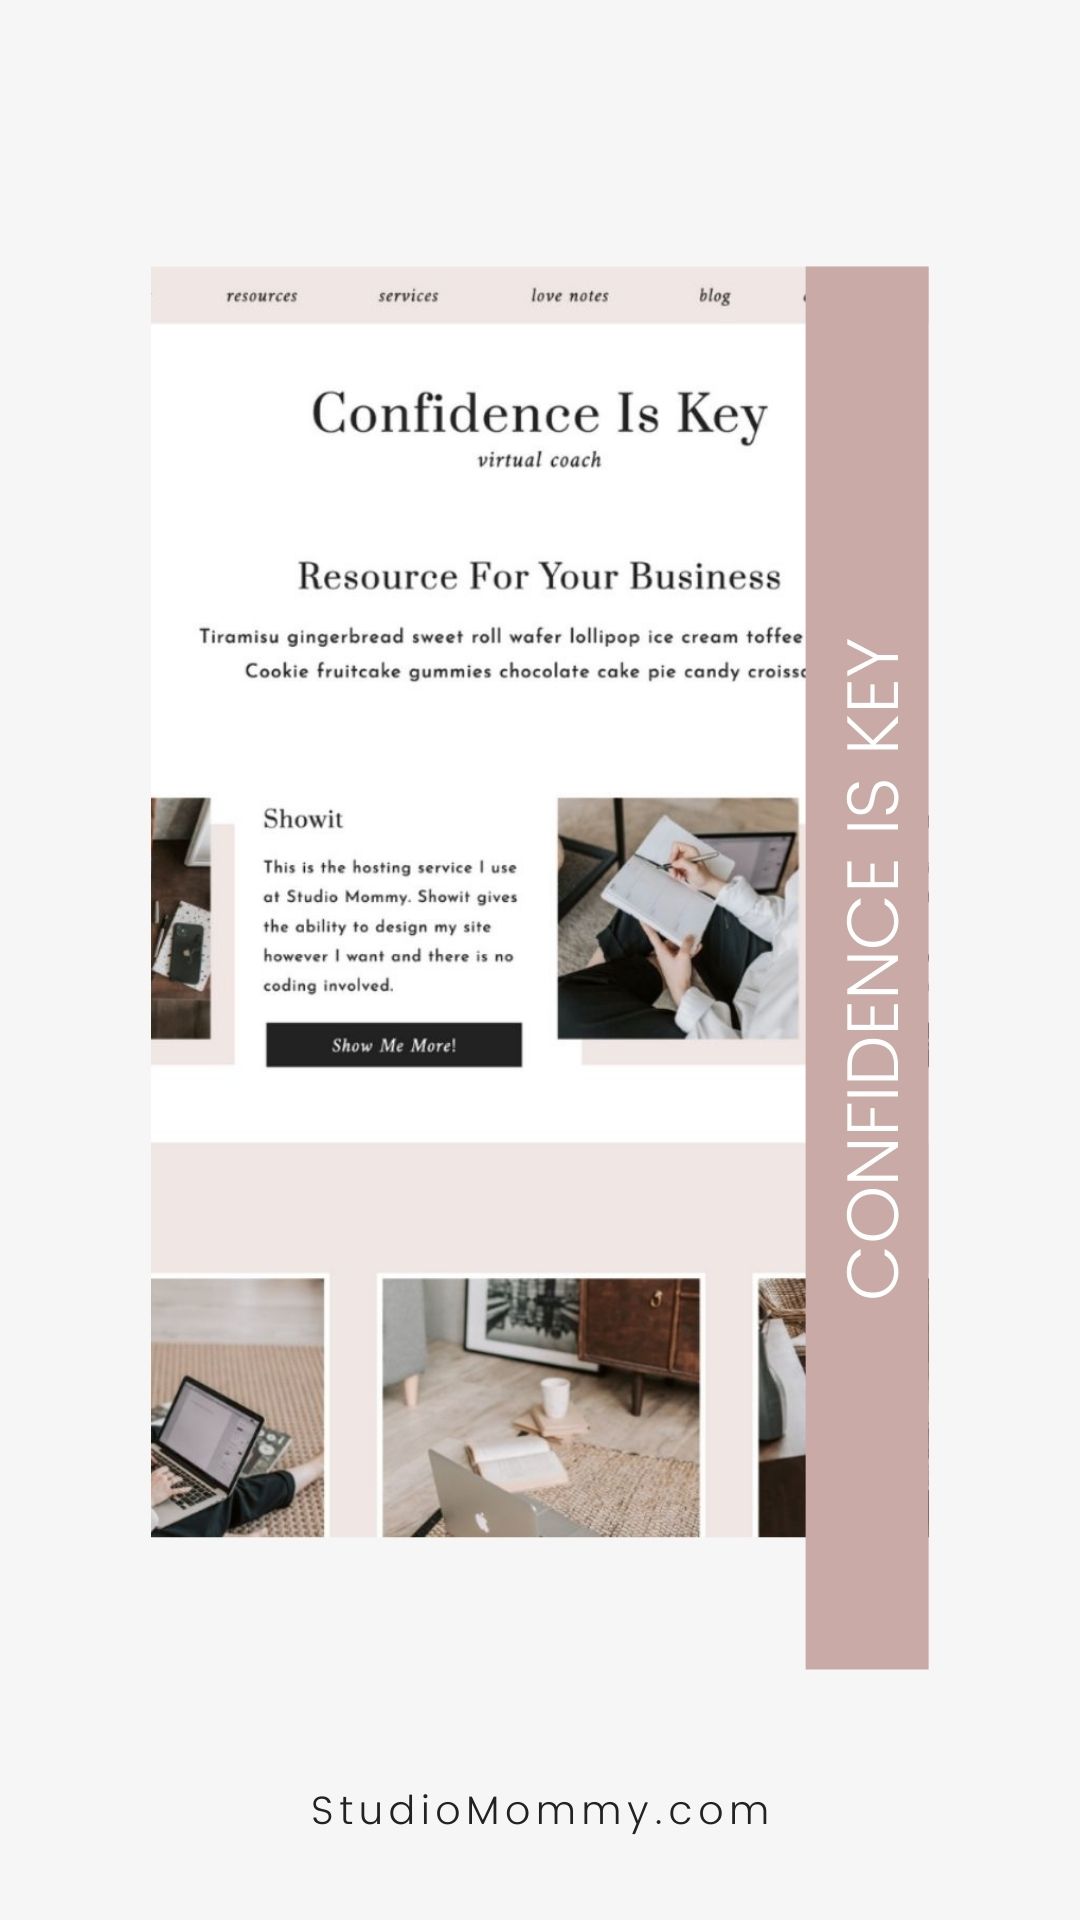 Are you looking for an affordable, easy-to-use Showit website template that you can download right away and begin creating your website?  And by affordable I mean less than the ten trips to Starbucks that you make in a month for your favorite latte!  Then look no further!  Meet Confidence is Key, an affordable Showit website template.